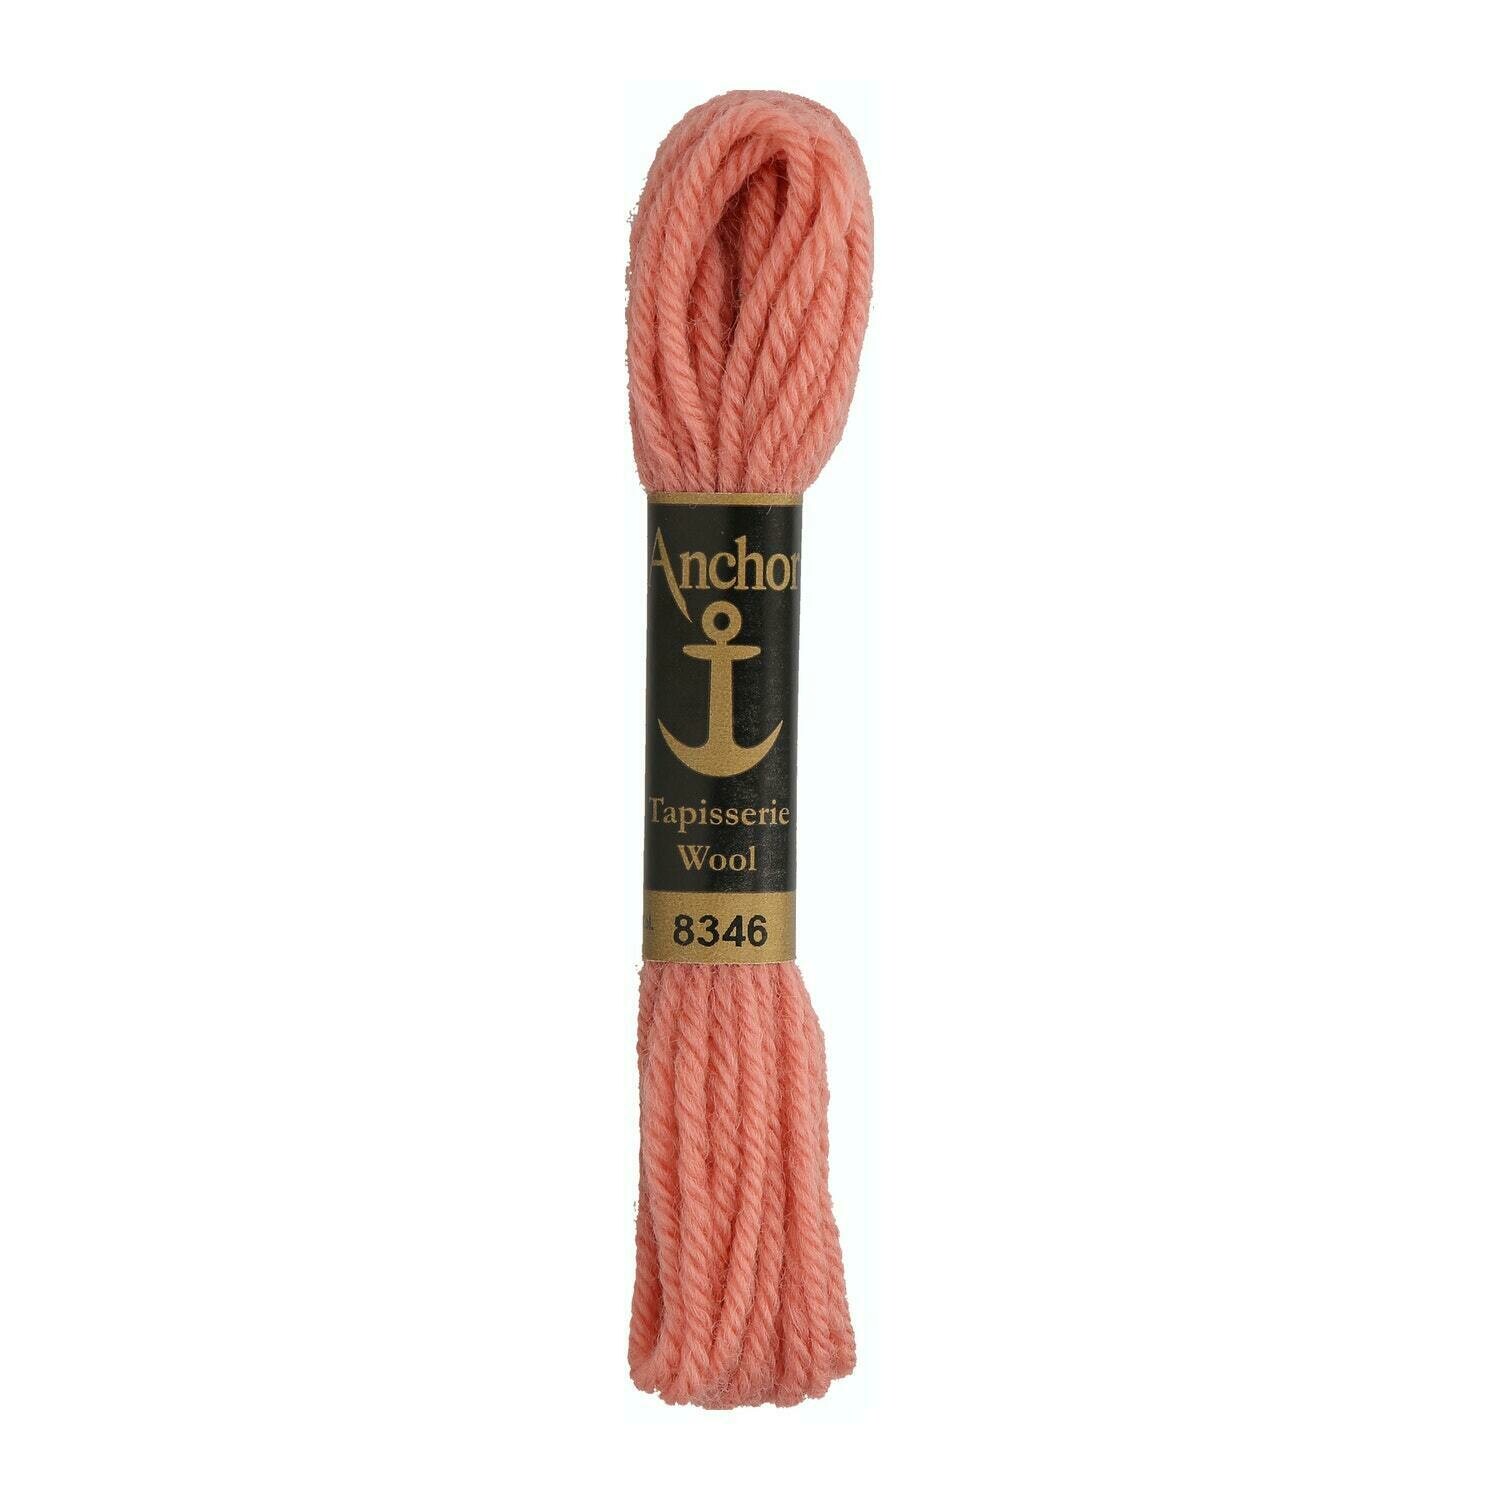 Anchor Tapisserie Wool #08346